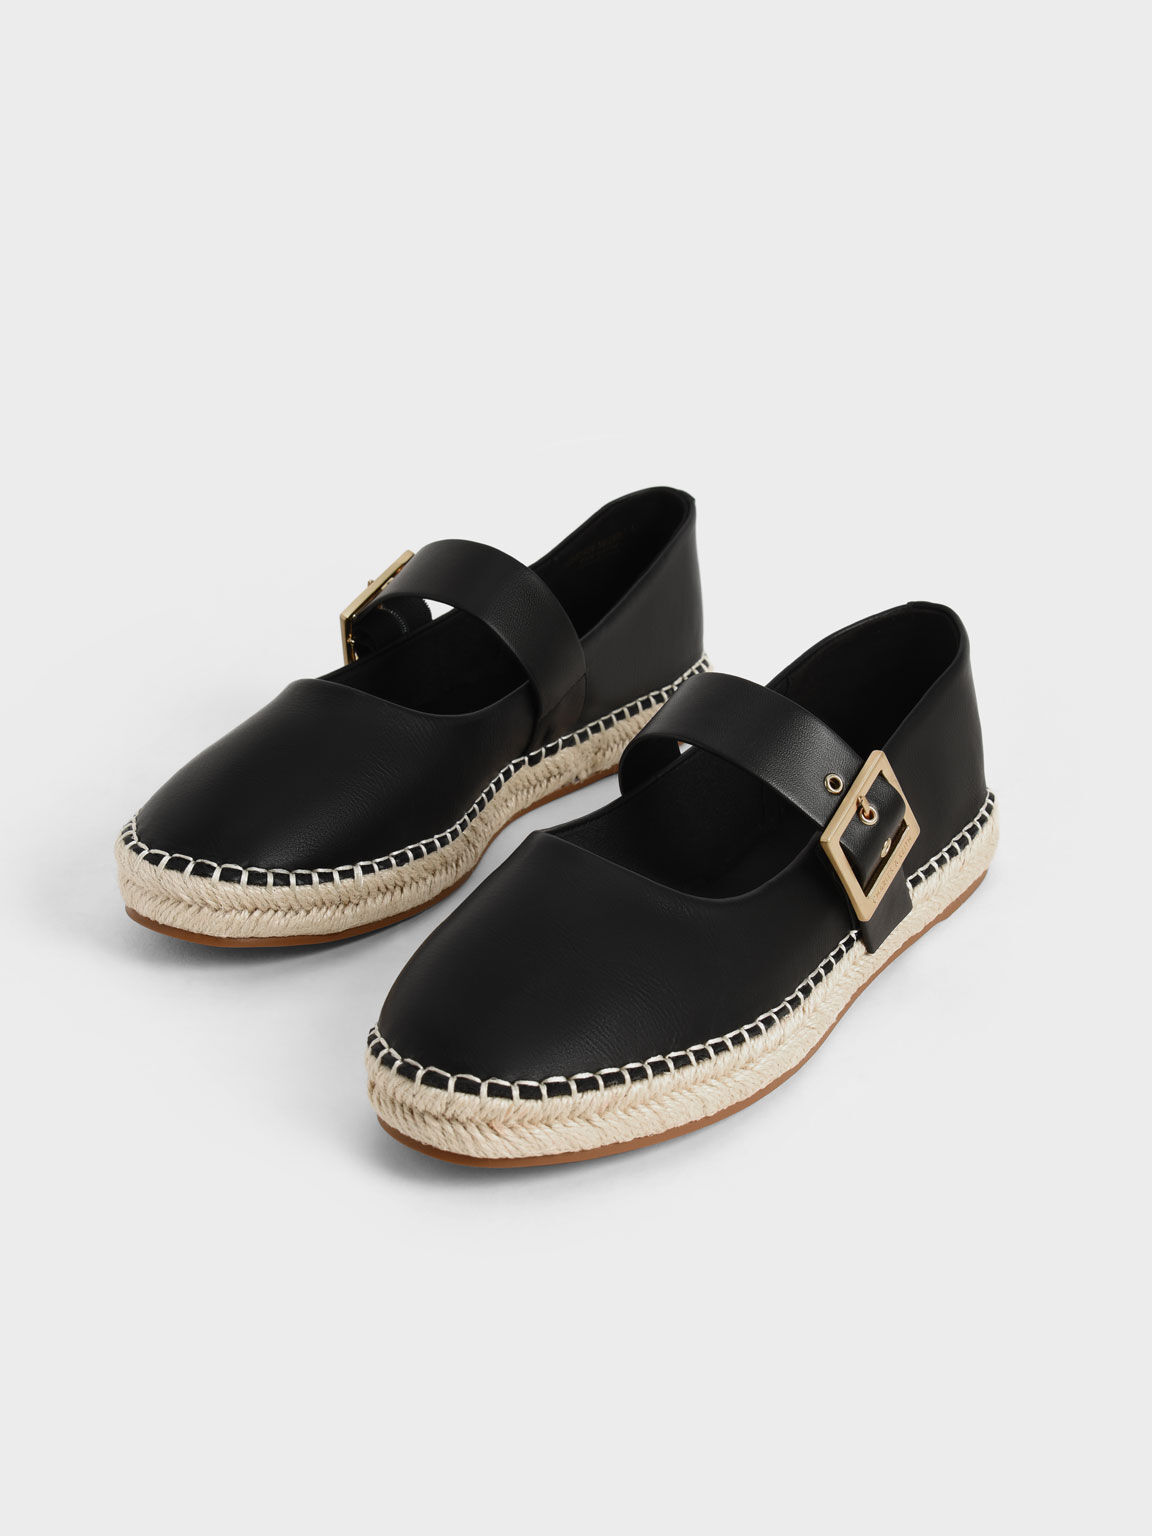 Black Buckled Espadrille Flats - CHARLES & KEITH VN